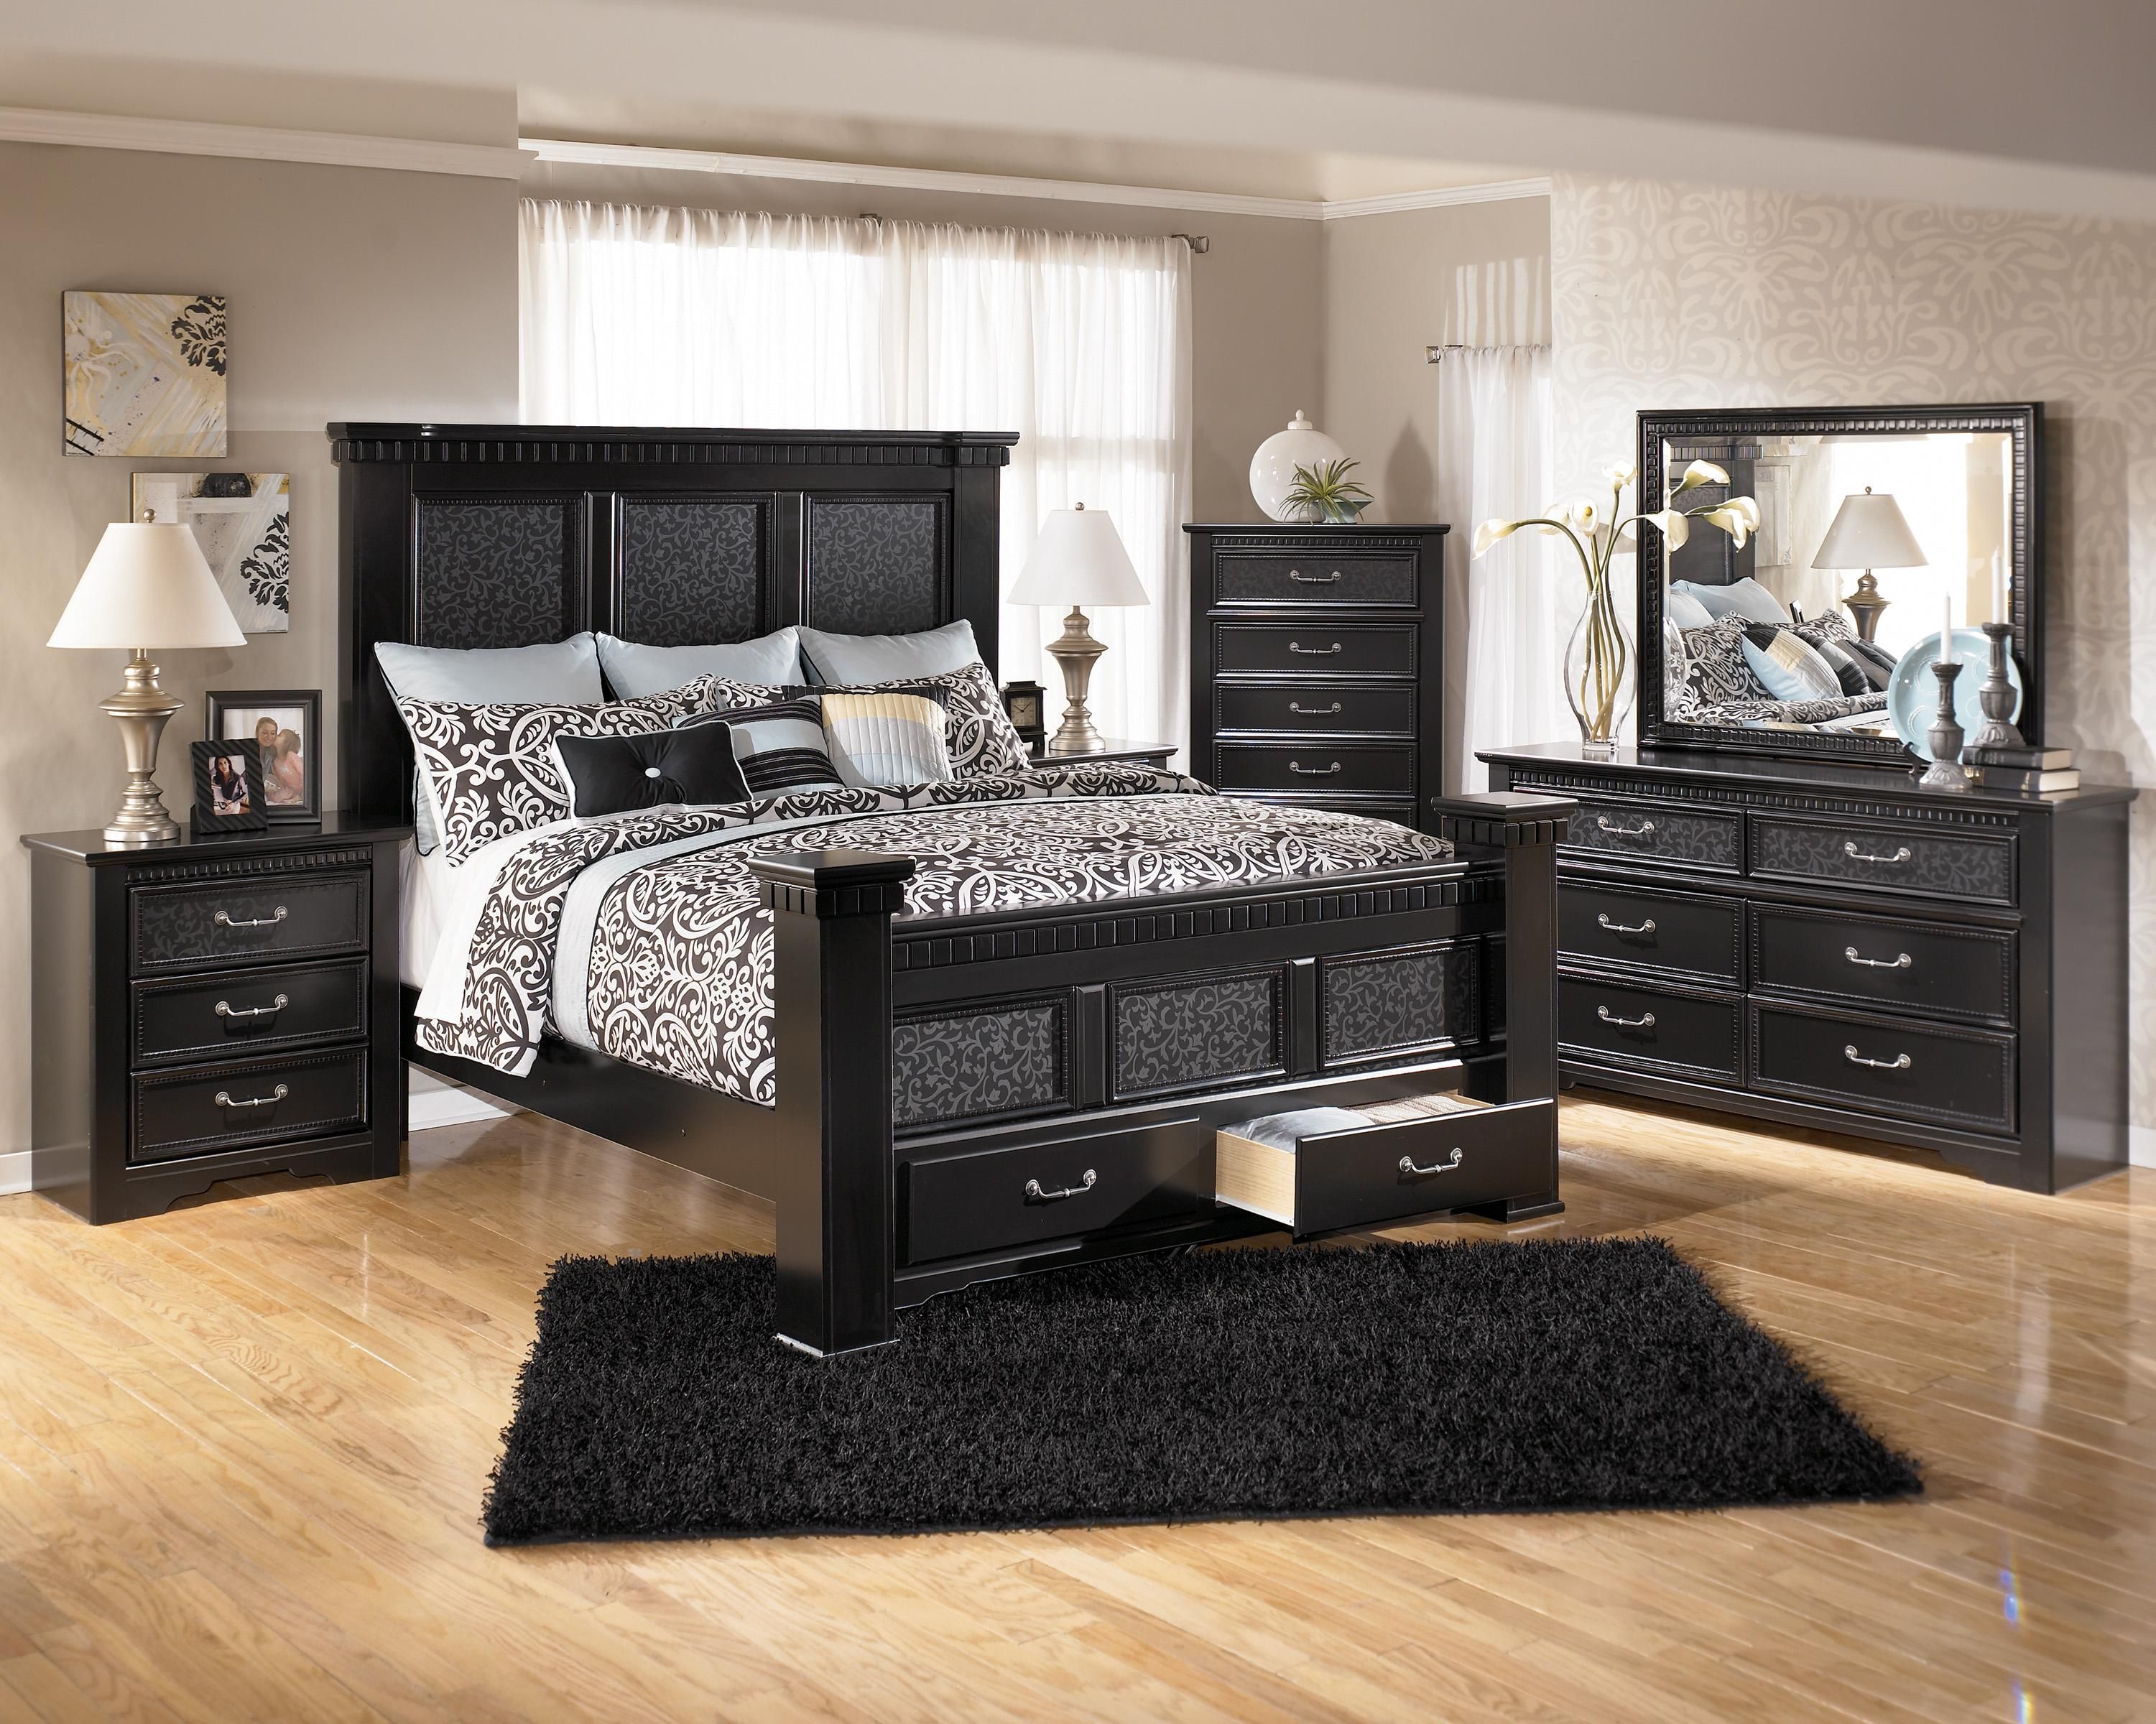 Black bedroom set Ashley Furniture Cavallino bedroom set with four-poster bed in mansion, footboard with storage space.  WLCBGQV